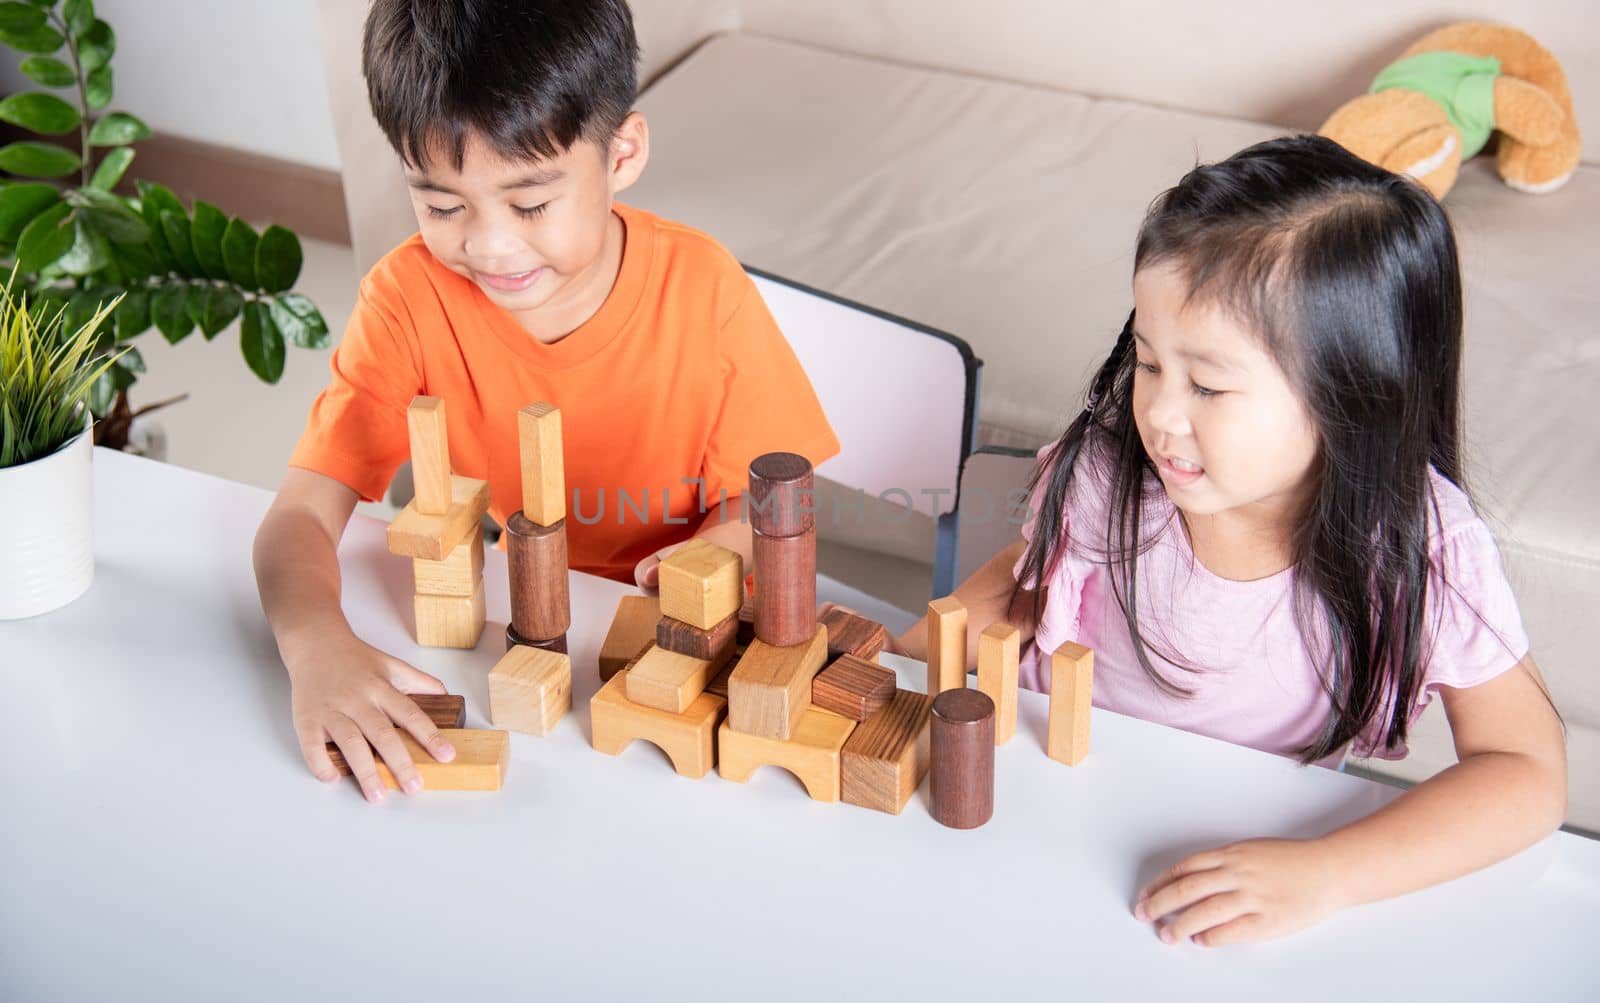 Children boy and girl playing with constructor wooden block building by Sorapop